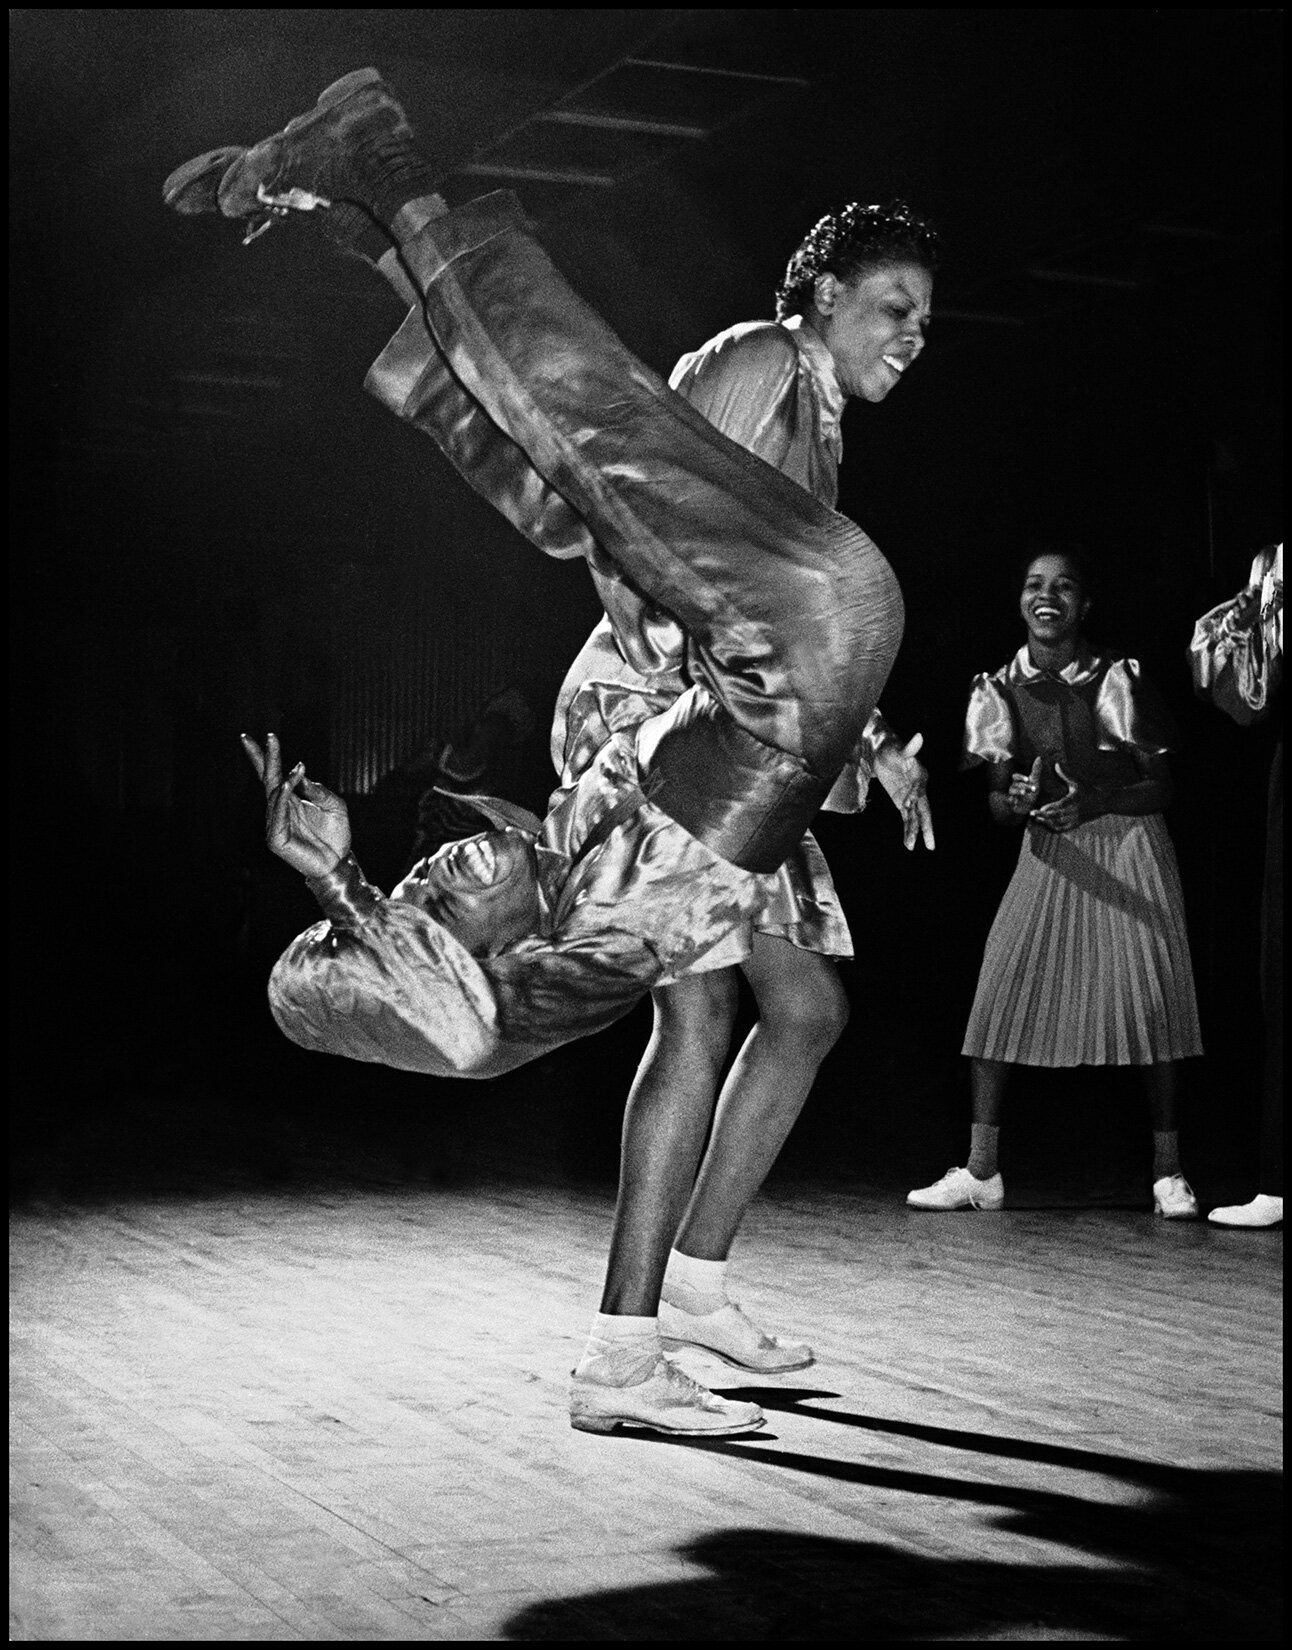  CORNELL CAPA/MAGNUM PHOTOS Gladys Crowder and Eddie "Shorty" Davis. Two of the great Lindy Hop dancers, in the Kat's Corner at the Savoy Ballroom. Harlem, New York City, USA. 1939. 